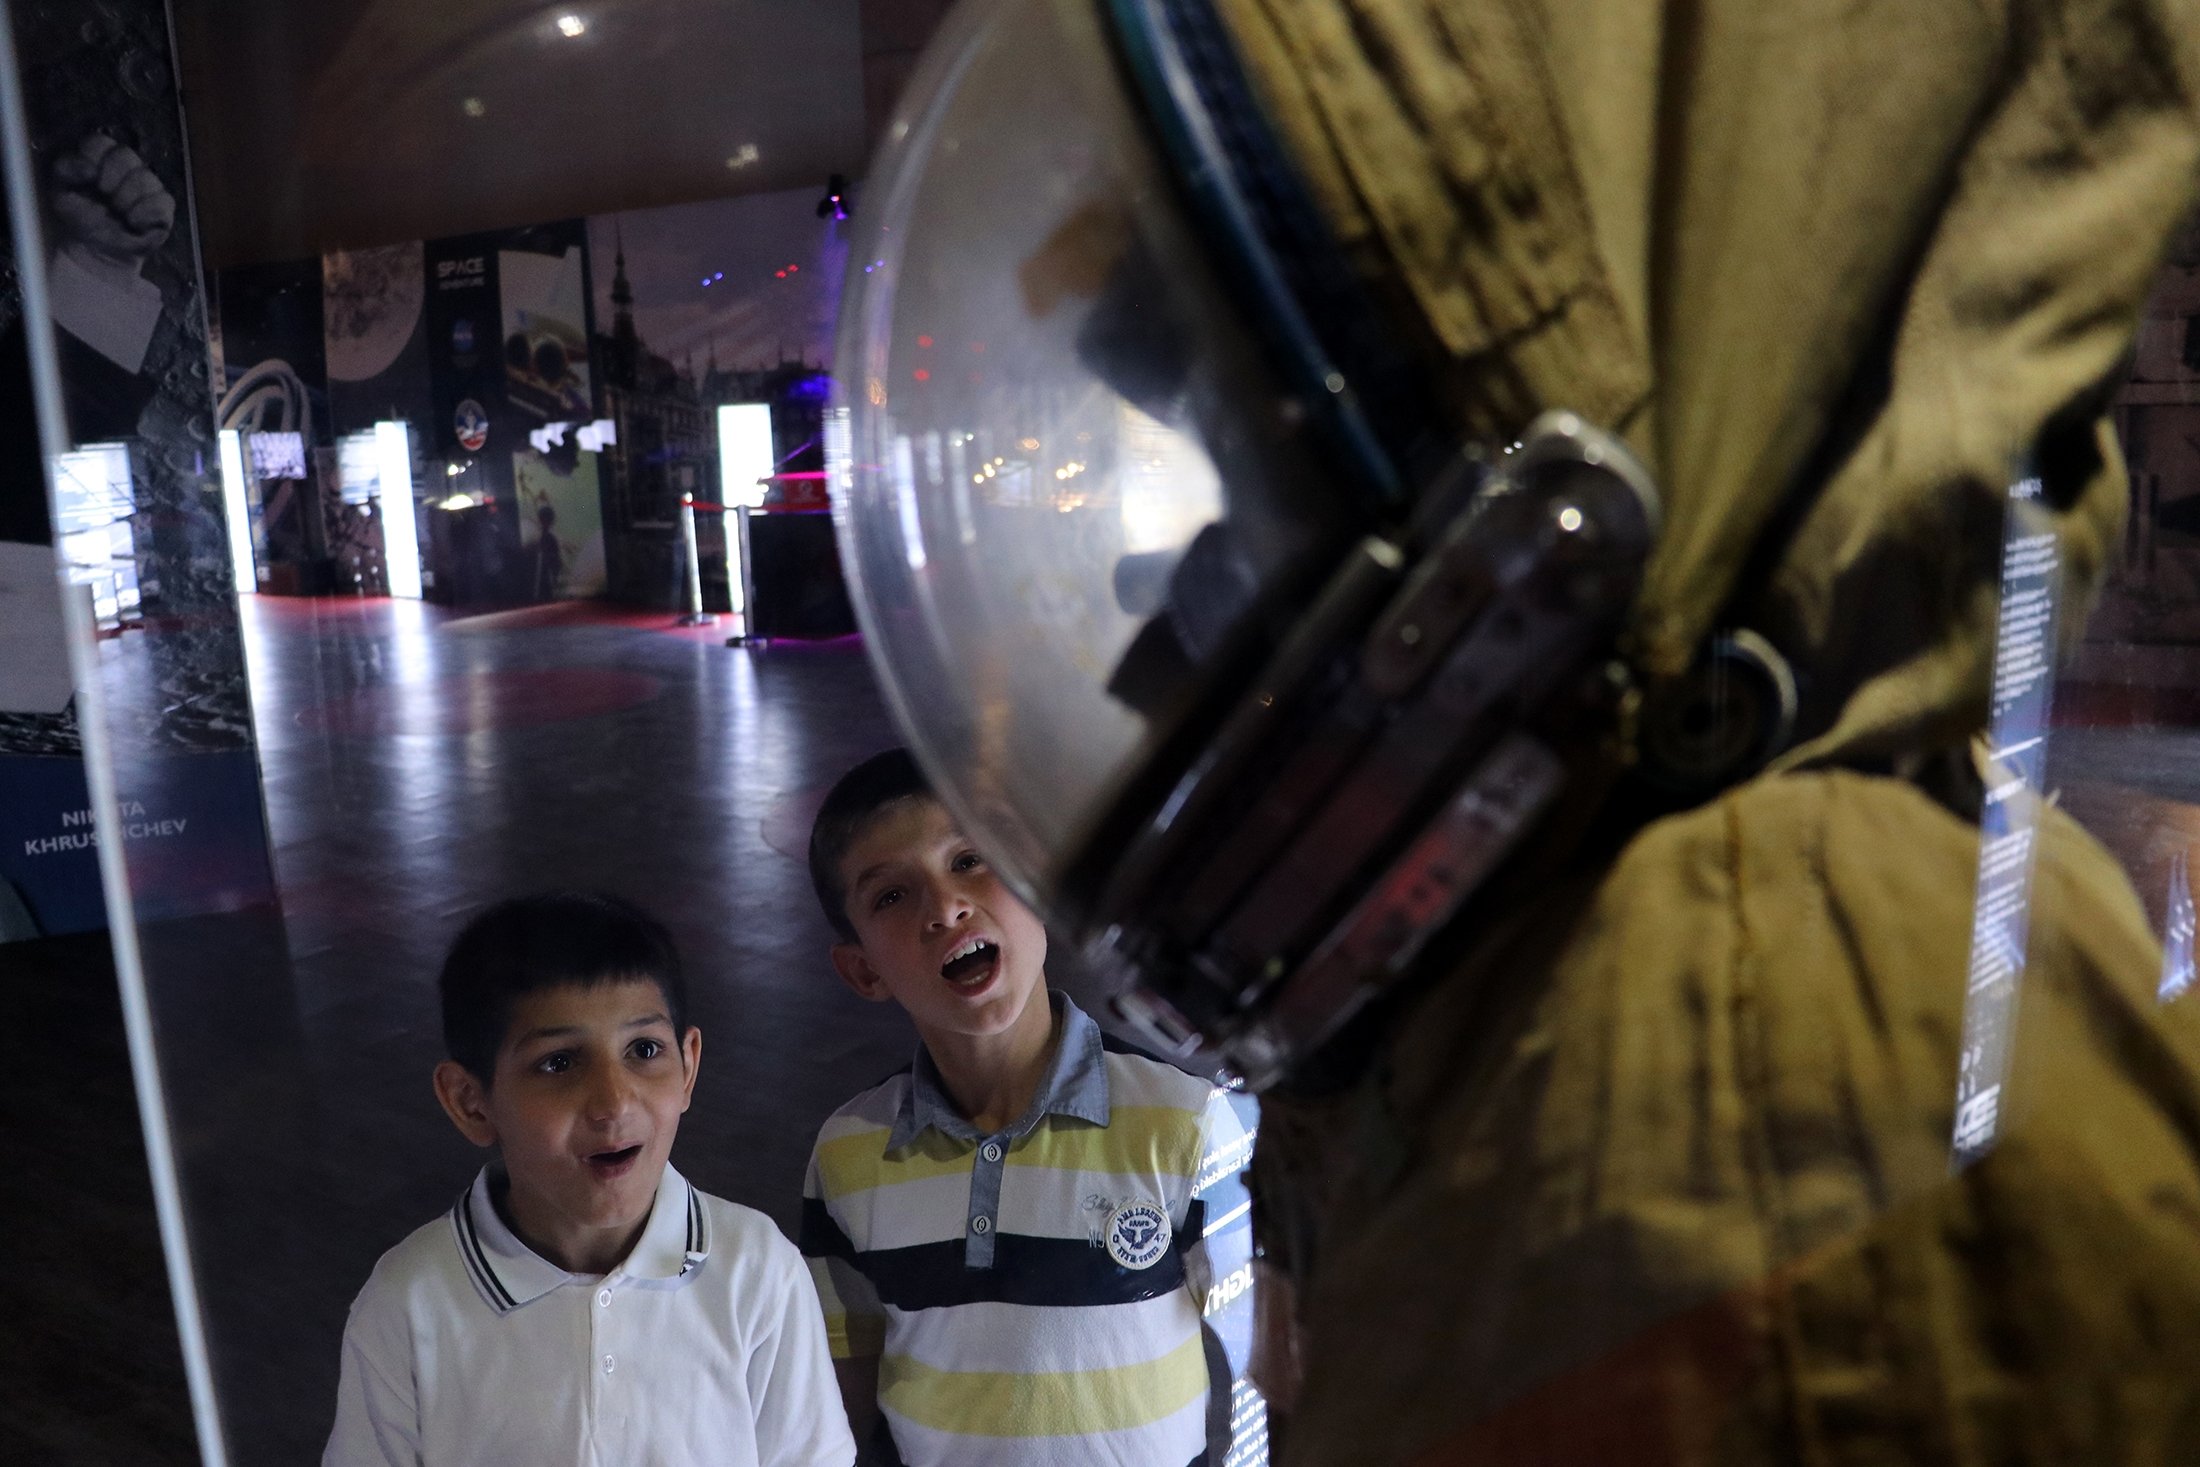 Turkish youth explores NASA's magical space adventures of 50 years